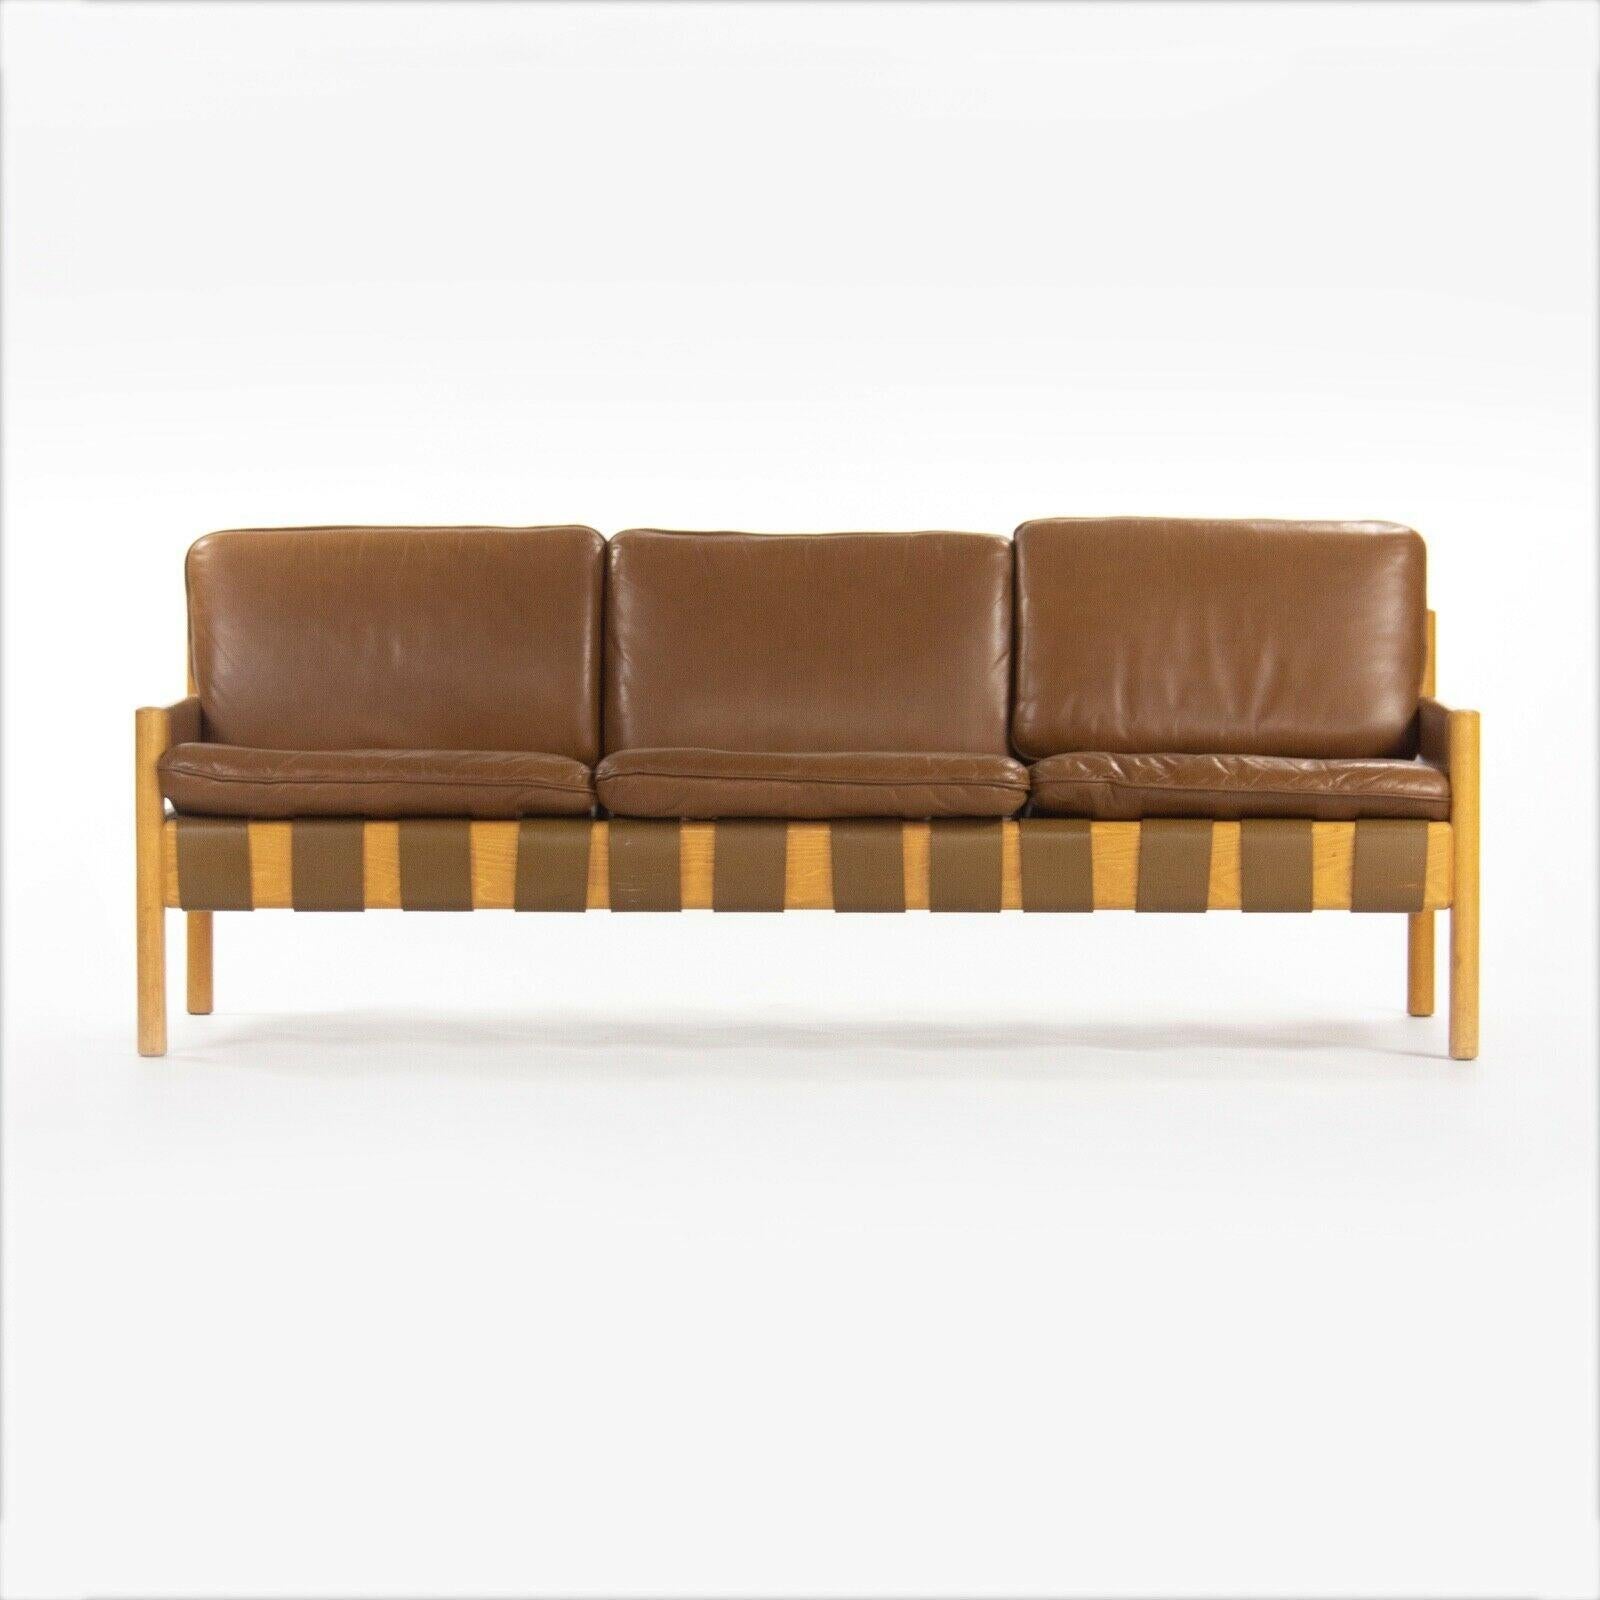 American 1976 Nicos Zographos Saronis Leather & Oak Sofa from Hugh Stubbins Library For Sale